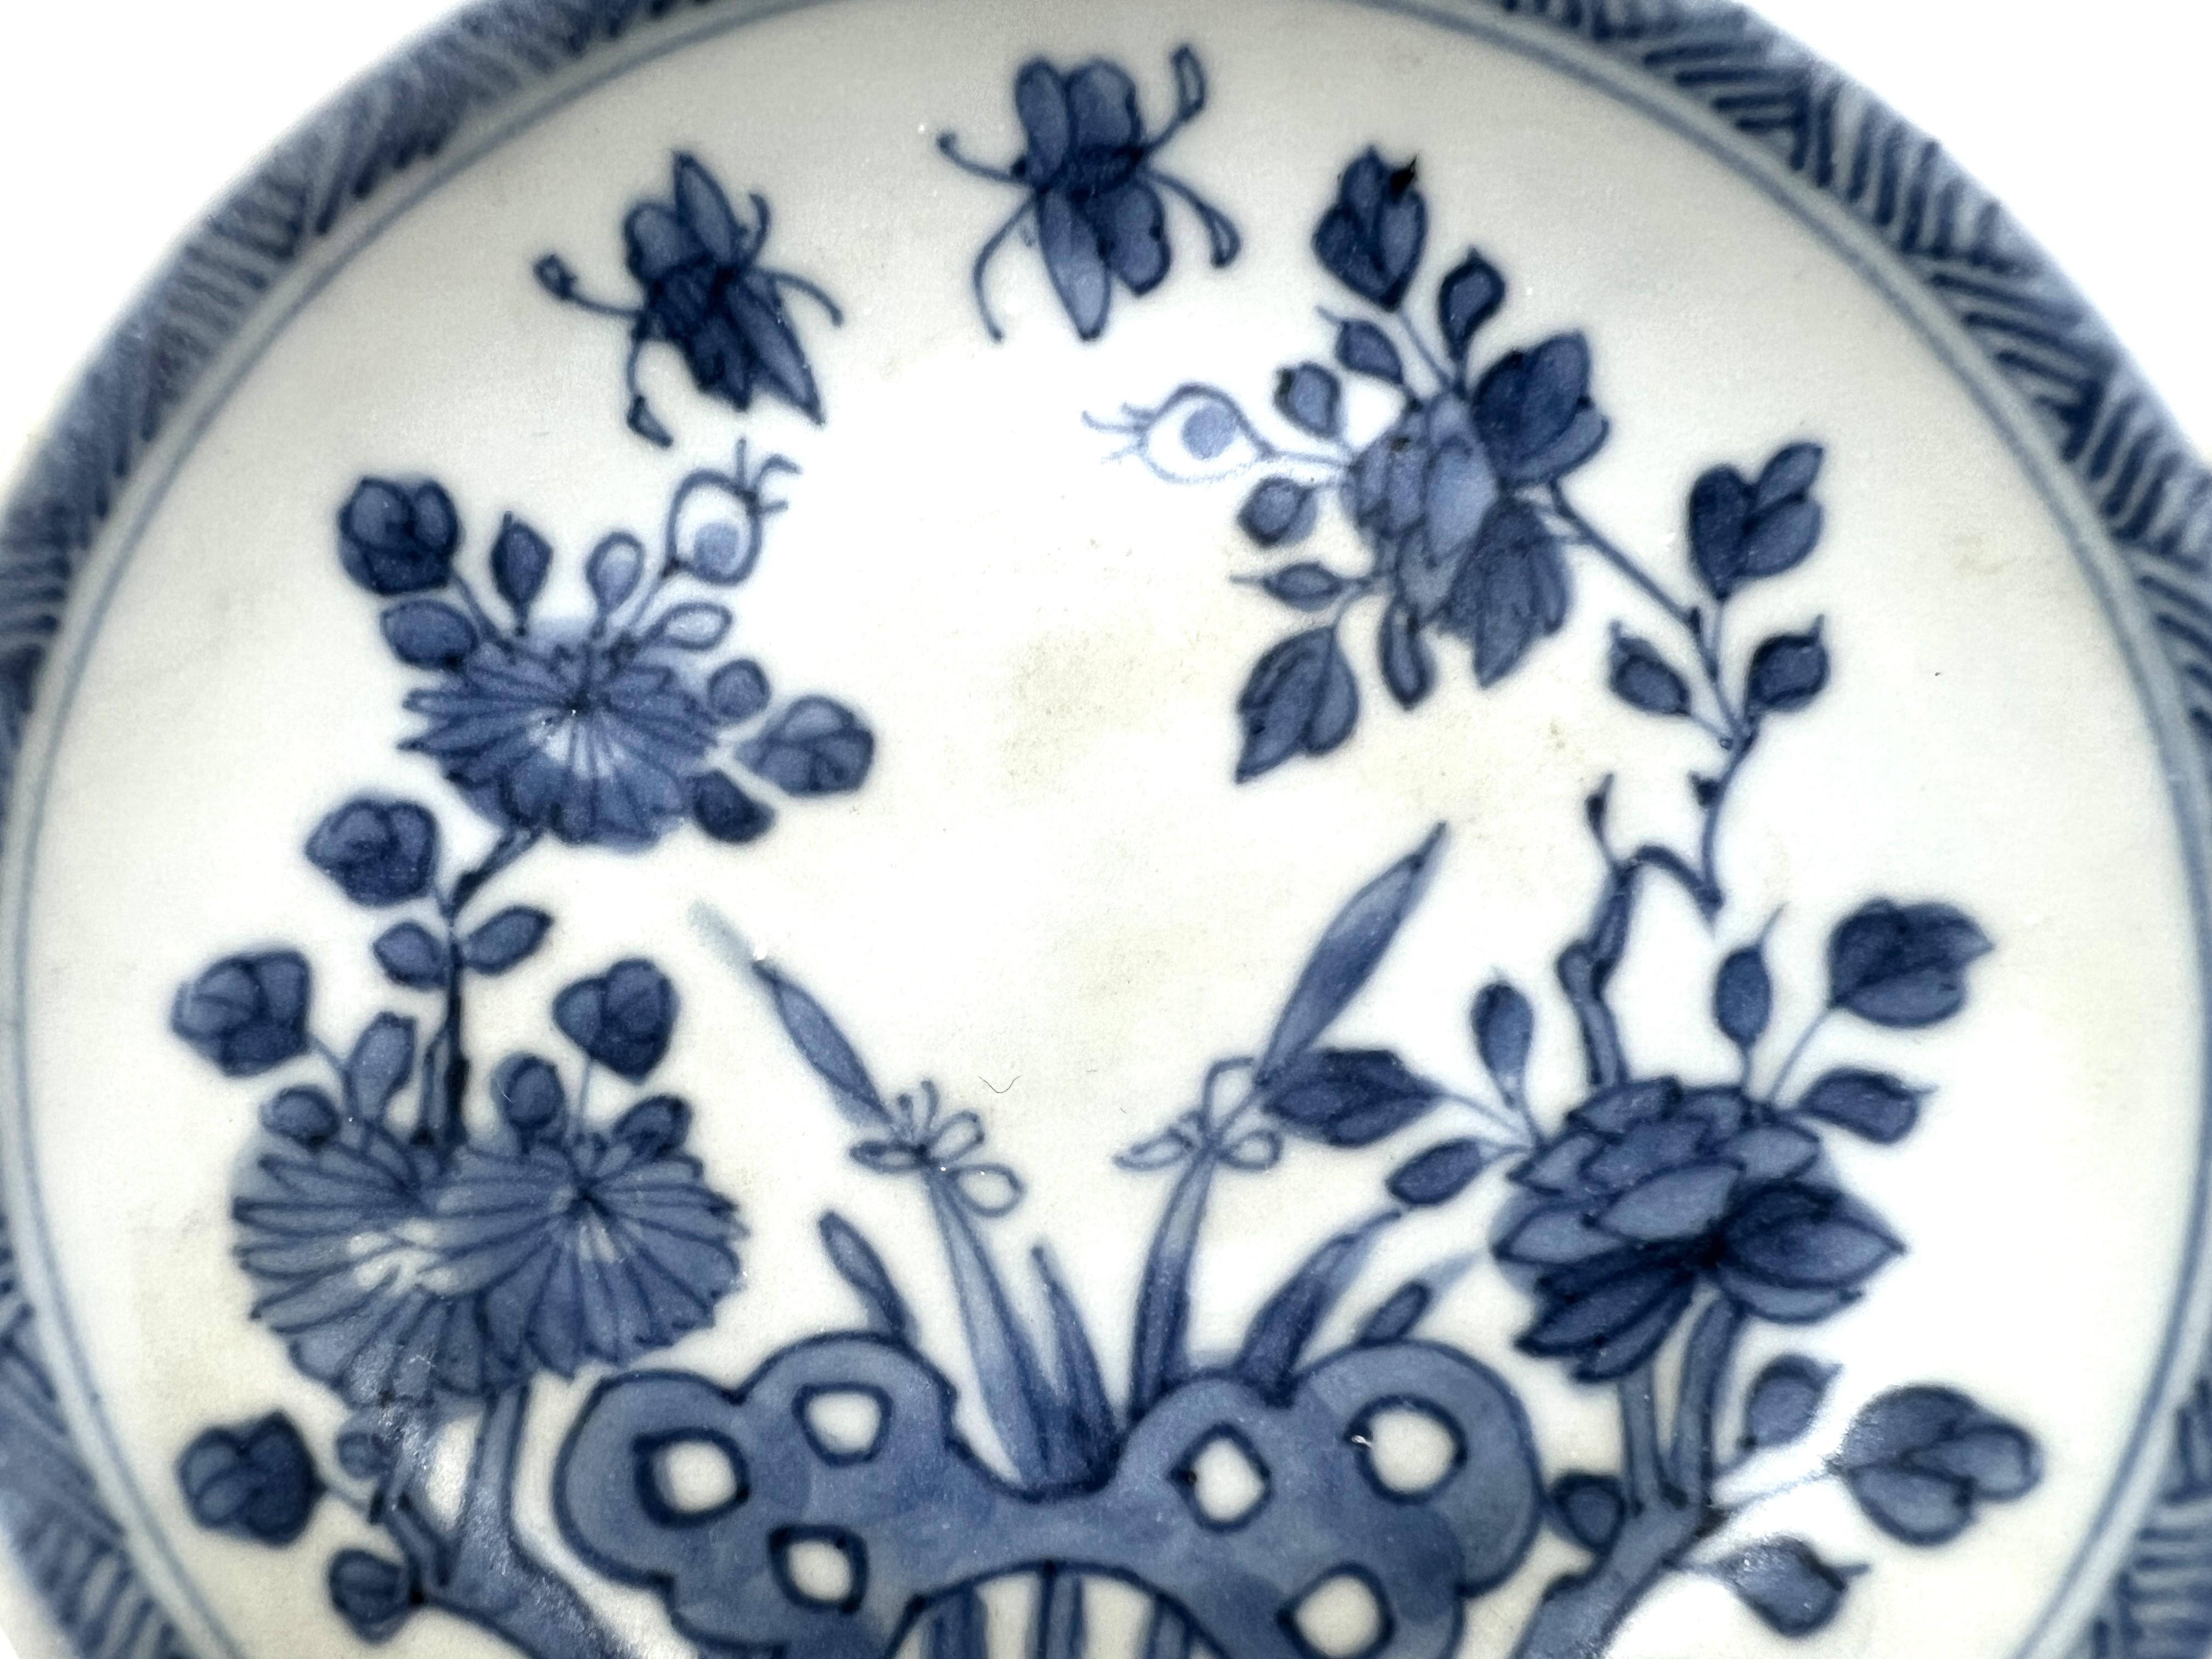 With peony and chrysanthemum plants flowering on a terrace, butterflies in flight.

Period : Qing Dynasty, Yongzheng Period
Production Date : C 1725
Made in : Jingdezhen
Destination : Netherland
Found/Acquired : Southeast Asia , South China Sea, Ca